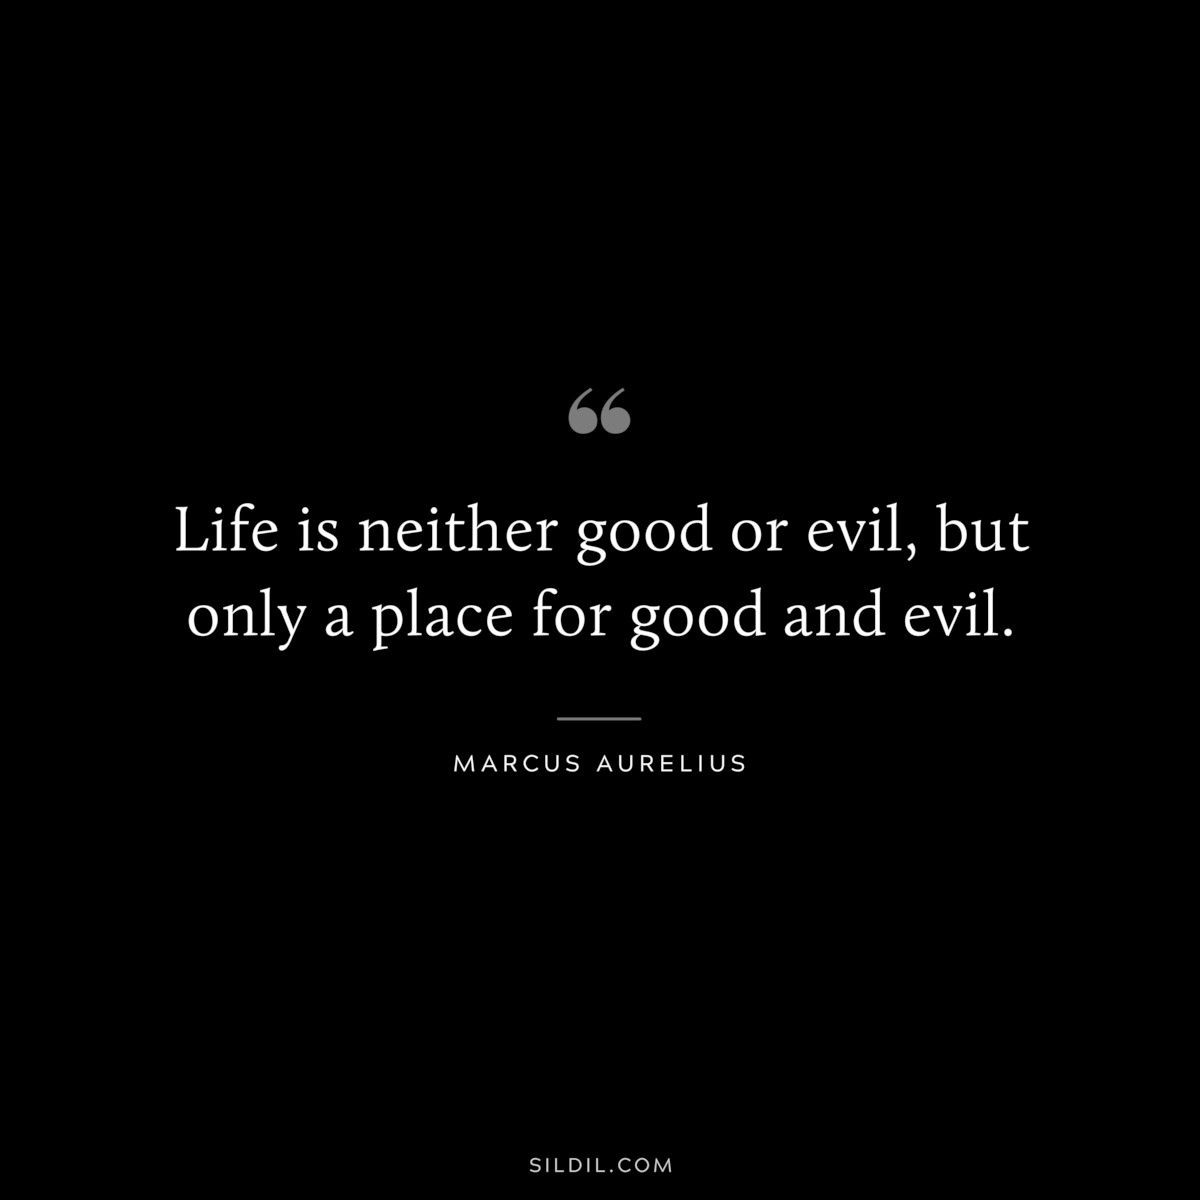 Life is neither good or evil, but only a place for good and evil. ― Marcus Aurelius